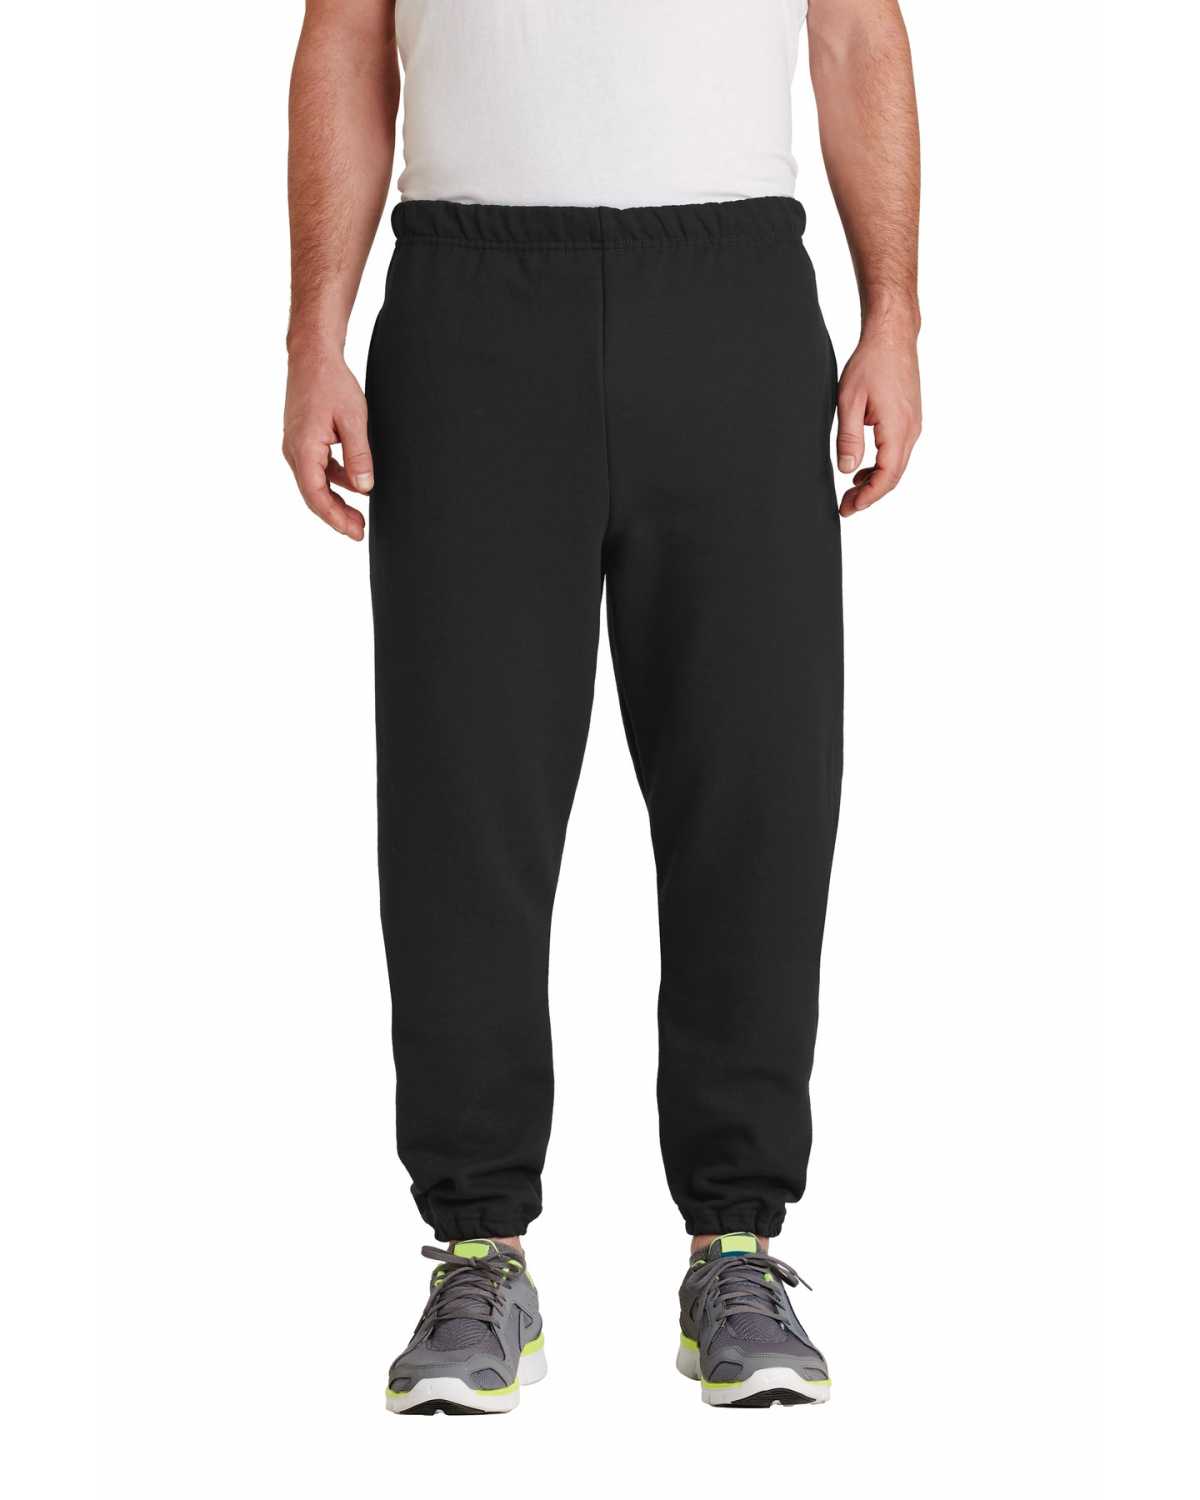 Jerzees 4850MP SUPER SWEATS NuBlend Sweatpant with Pockets on discount ...